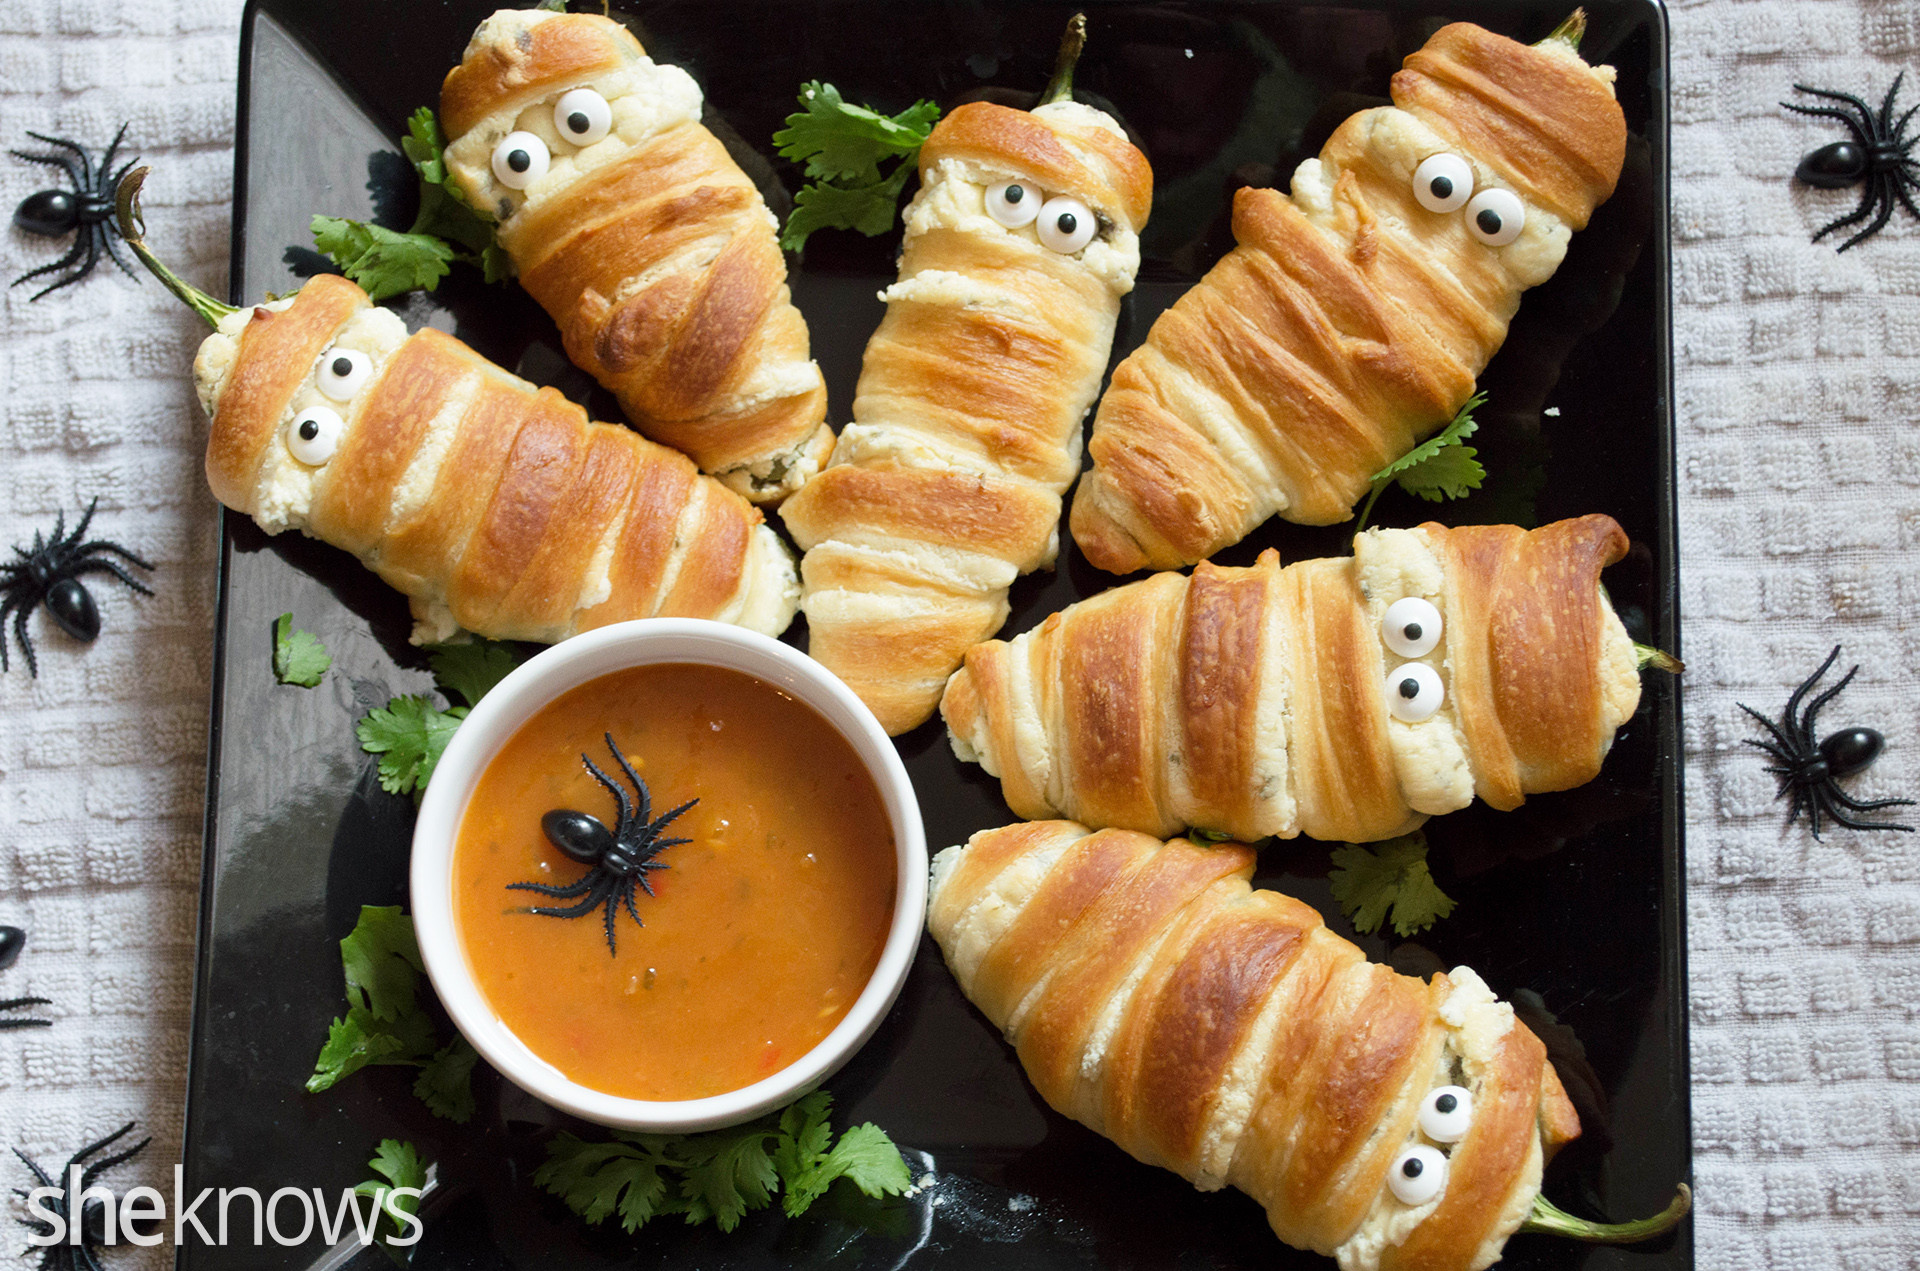 Halloween Jalapeno Poppers
 Transform jalapeño poppers into mummies for the cutest